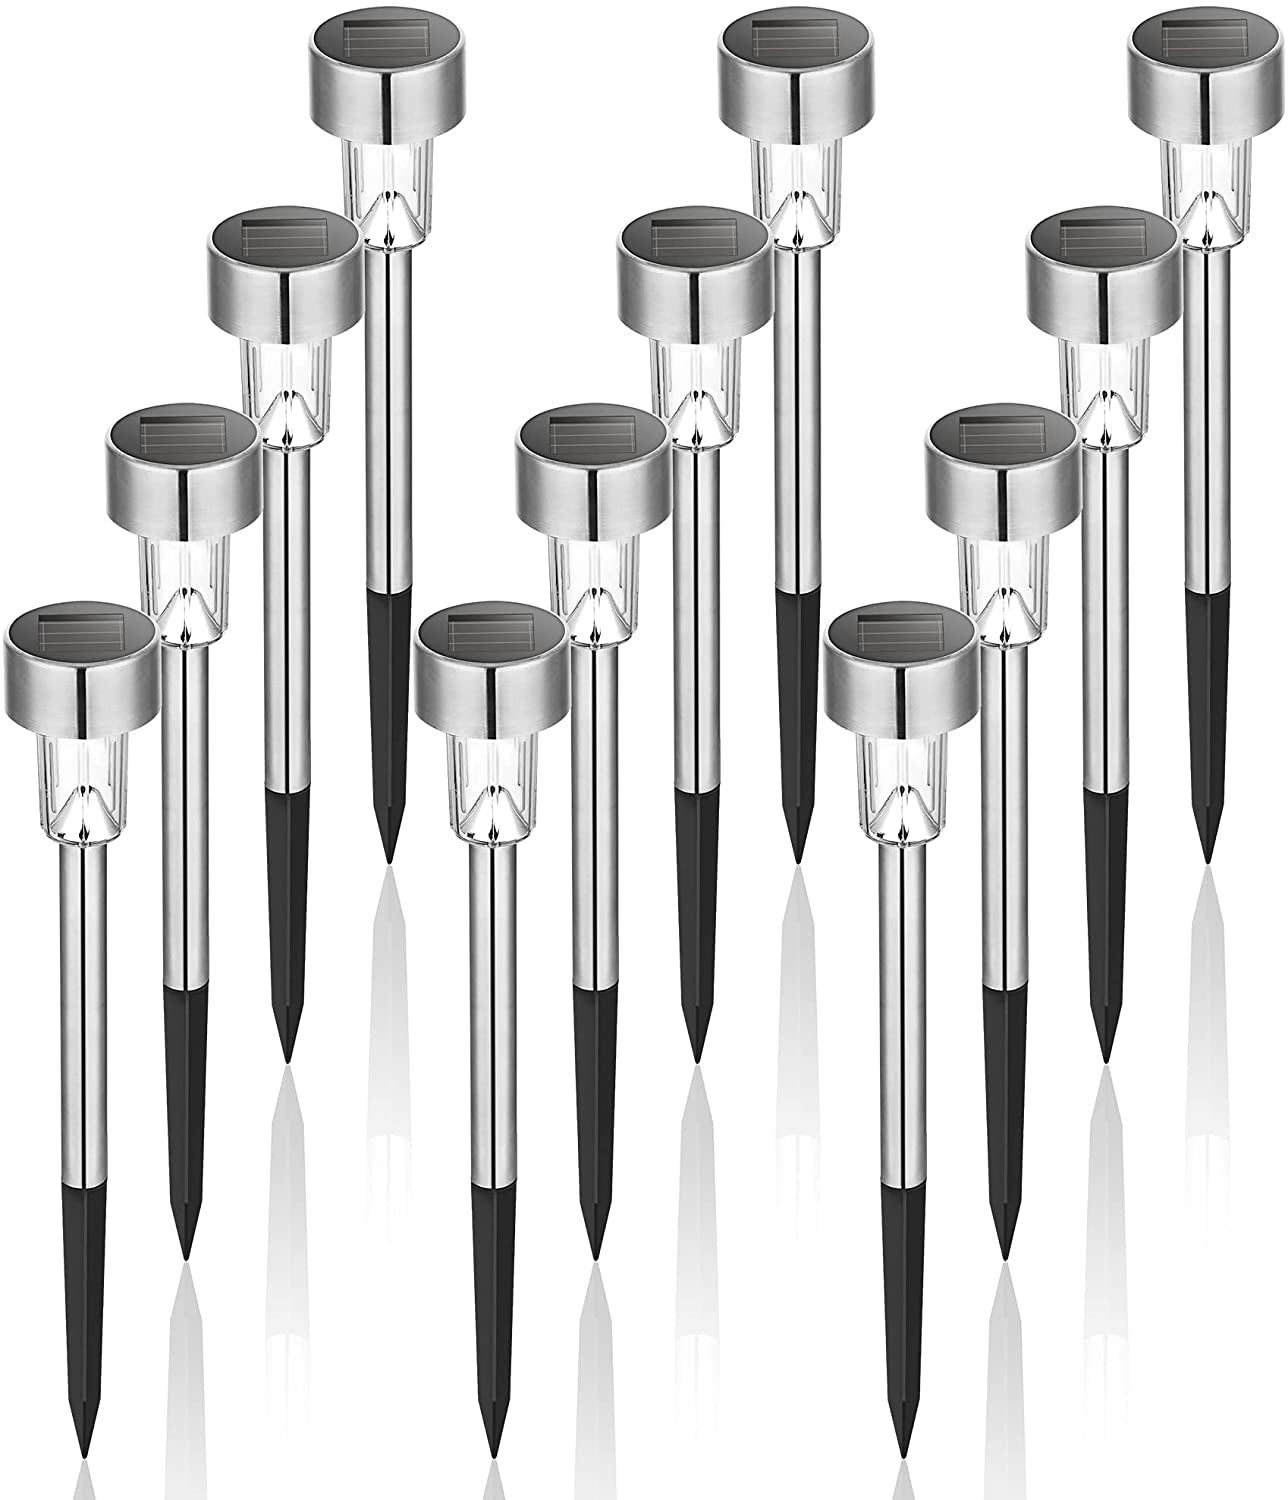 GIGALUMI, GIGALUMI Solar Outdoor Lights, 12Pack Stainless Steel Solar Lights Outdoor Waterproof, LED Pathway Lights Outdoor Solar Lights Solar Garden Lights for Patio, Lawn, Yard and Landscape-(Warm White)